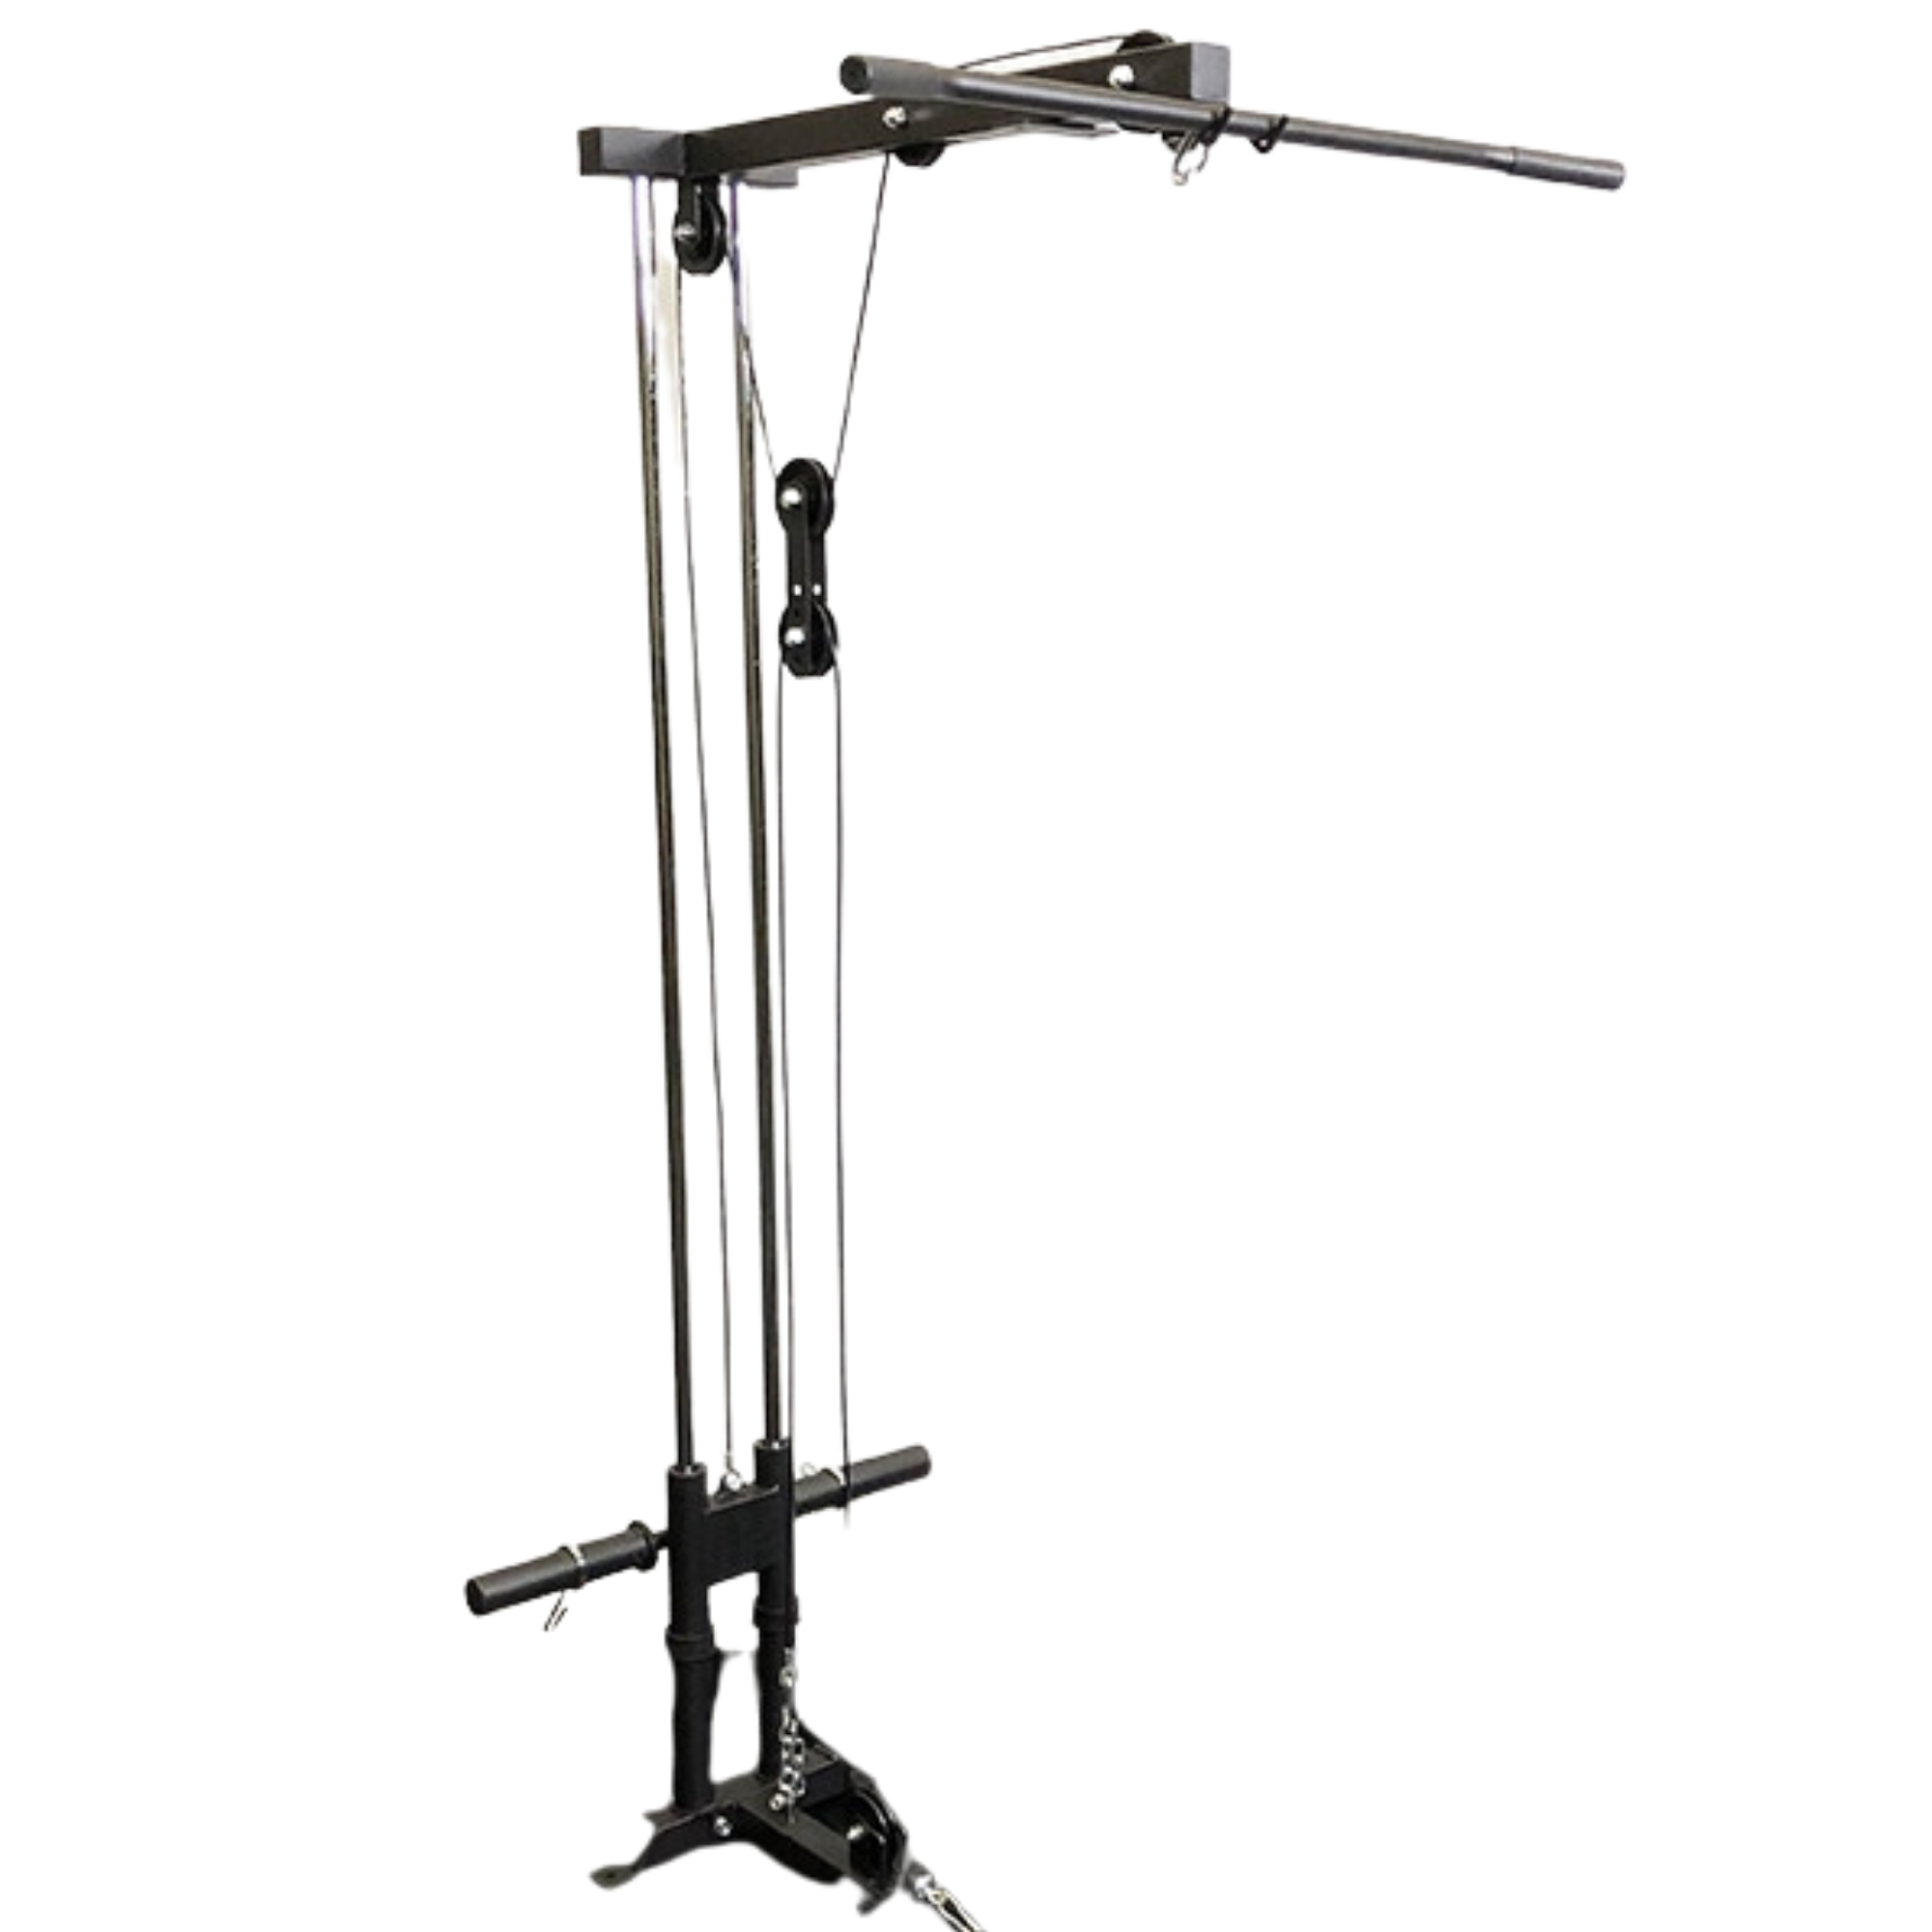 Overdrive Lat-pulldown Attachment Kit for Commercial Light Power Rack